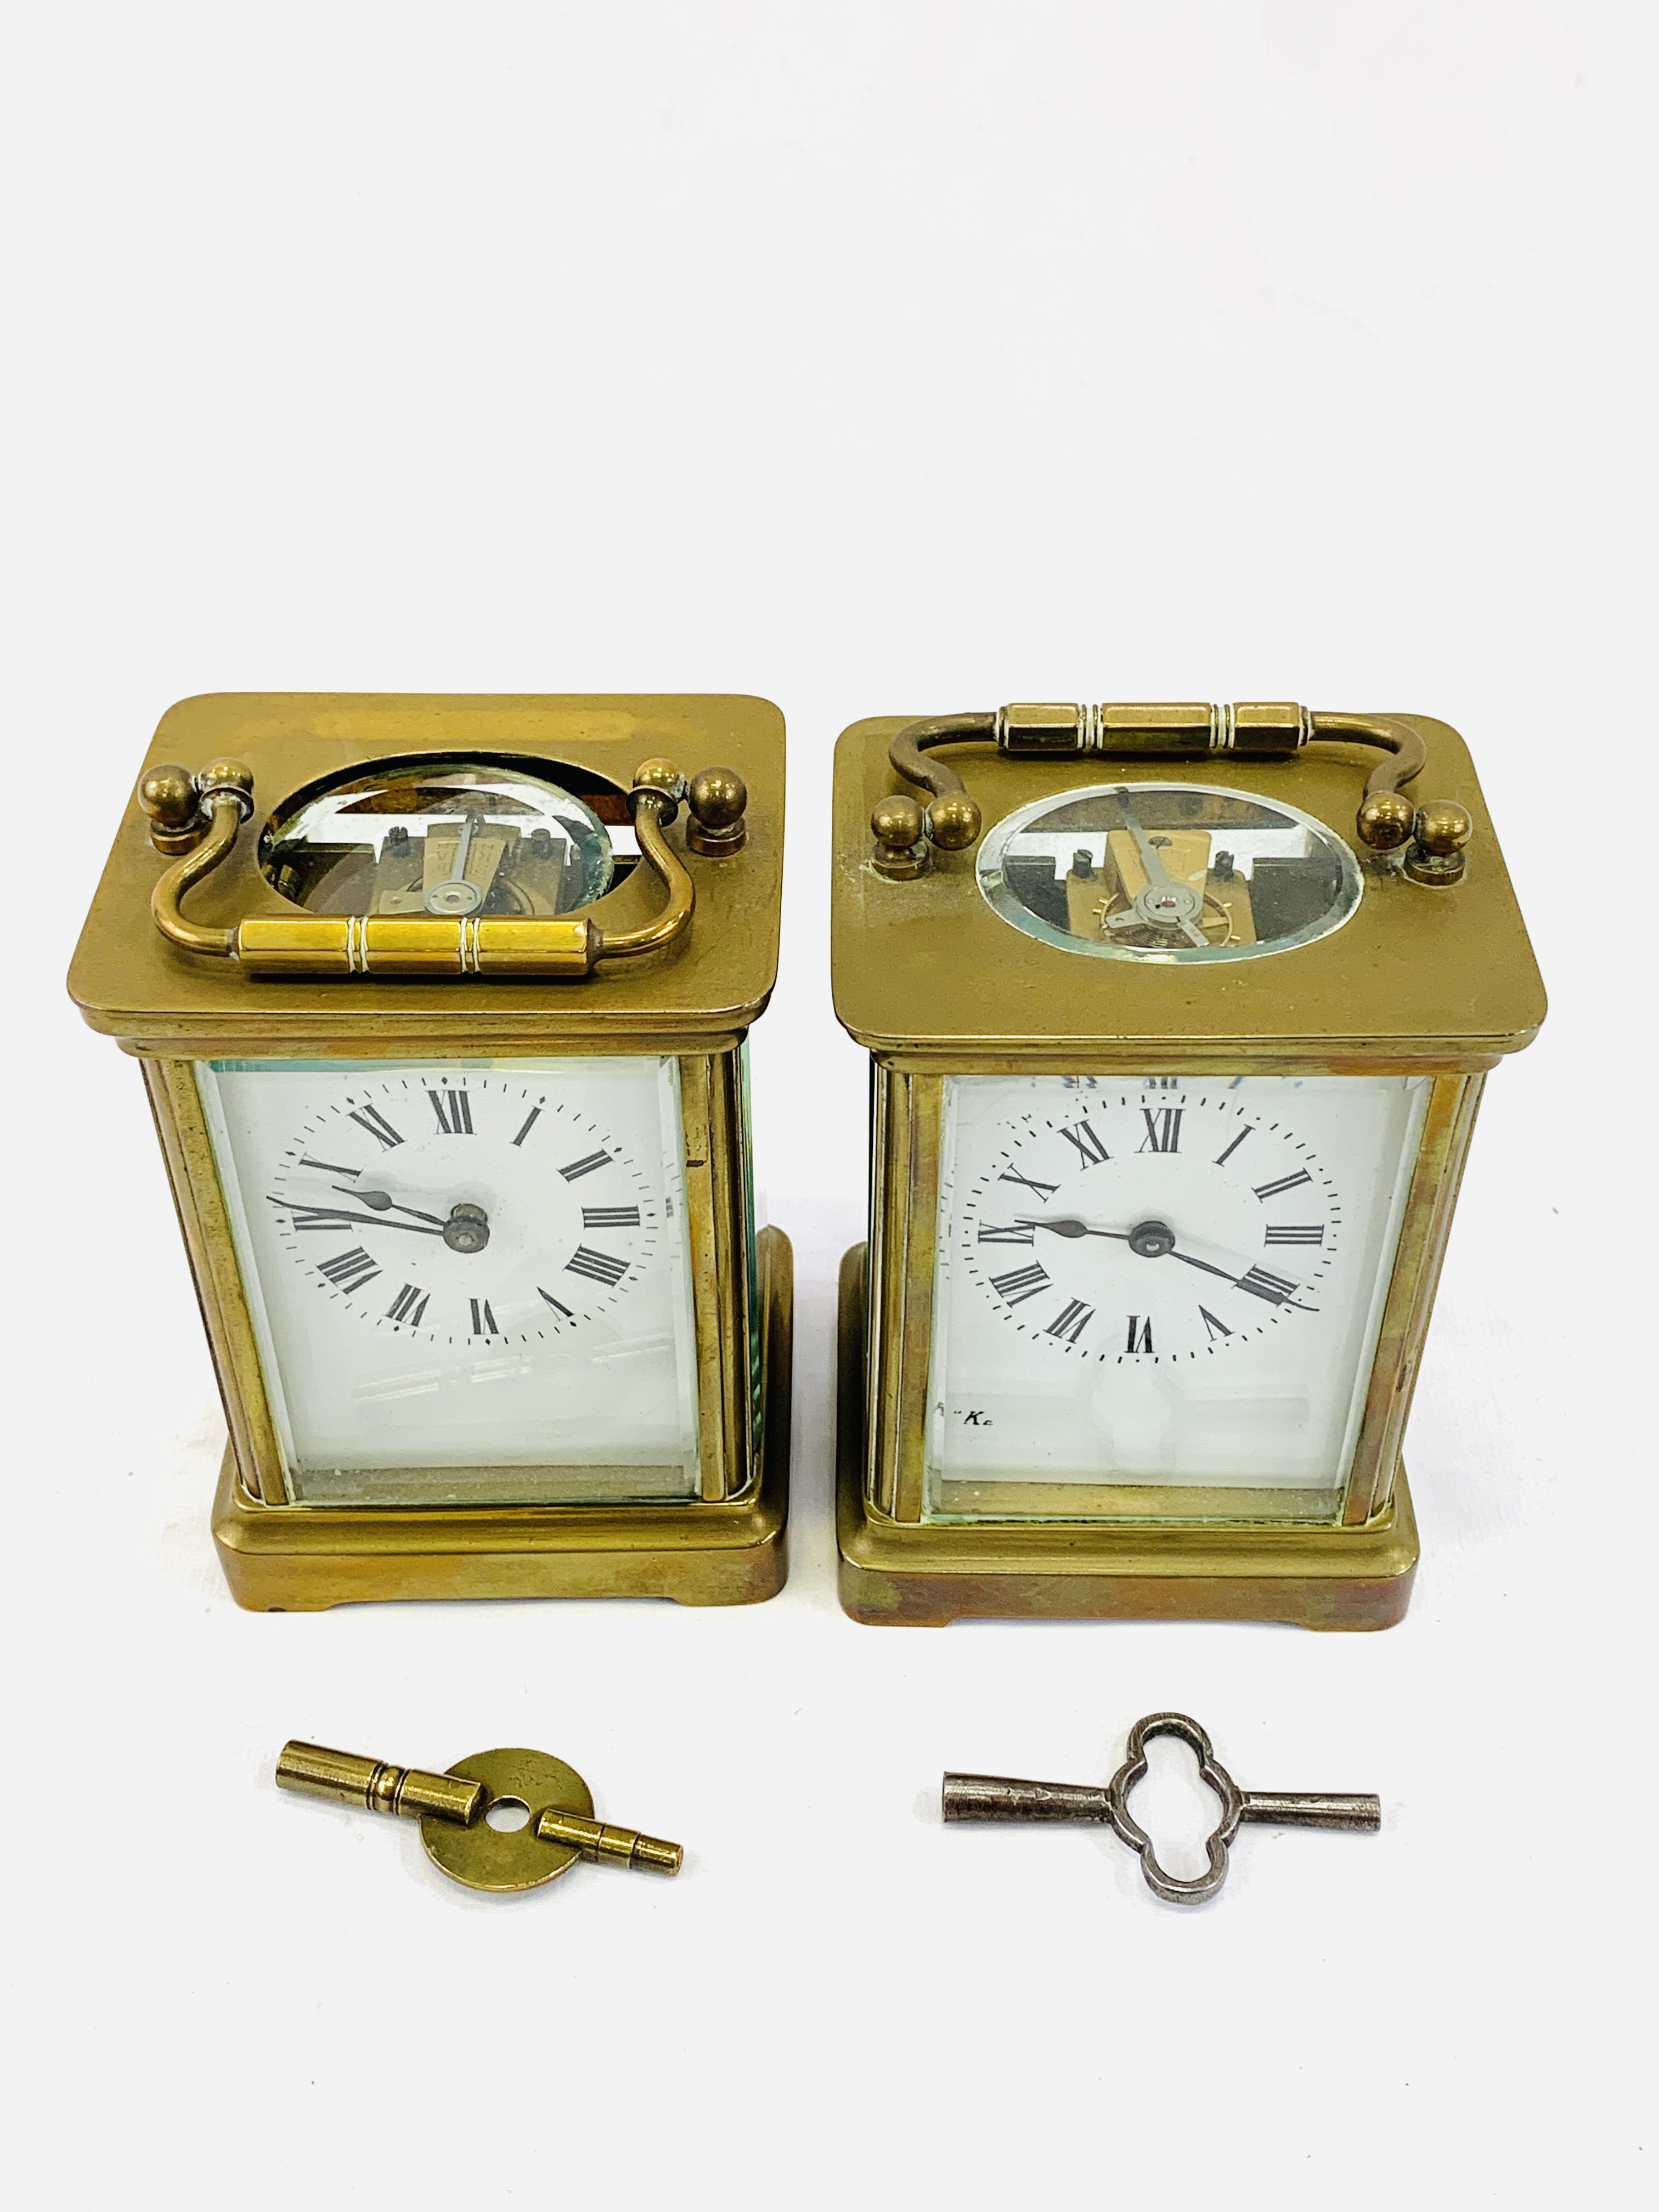 Two brass carriage clocks - Image 2 of 4